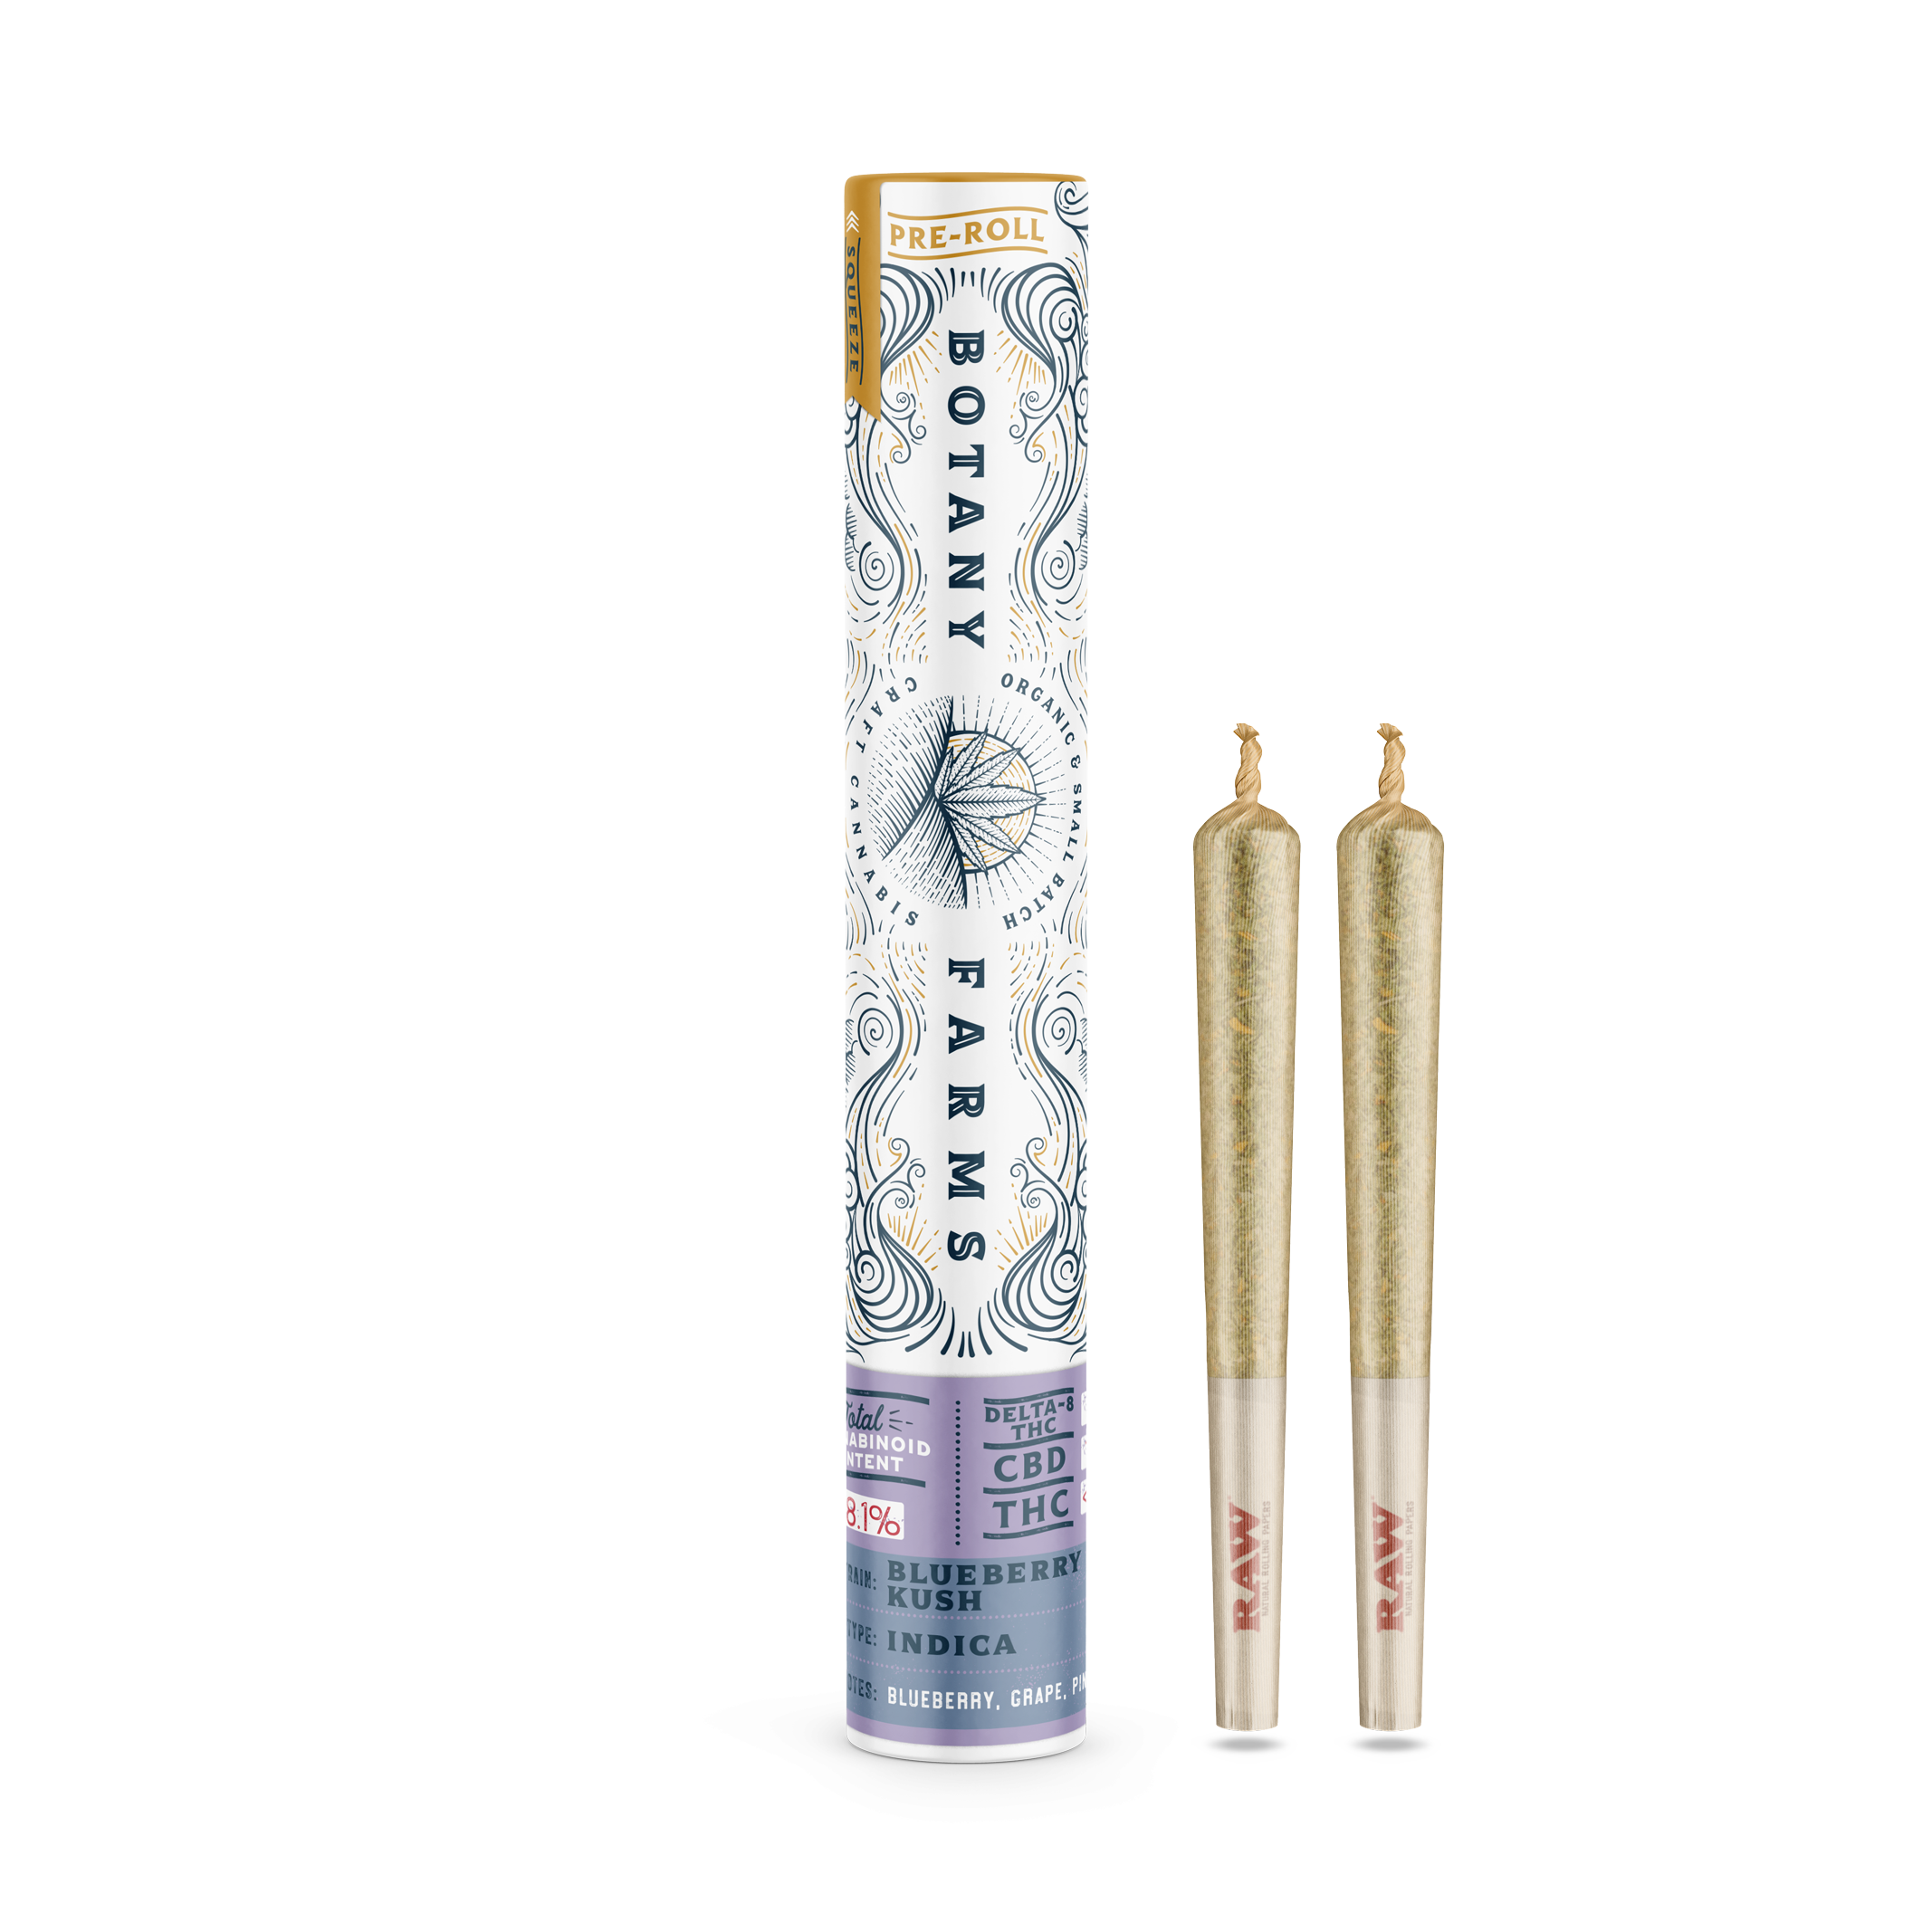 Delta-8 Blueberry Kush Pre-Roll (2 Half Grams) from Botany Farms